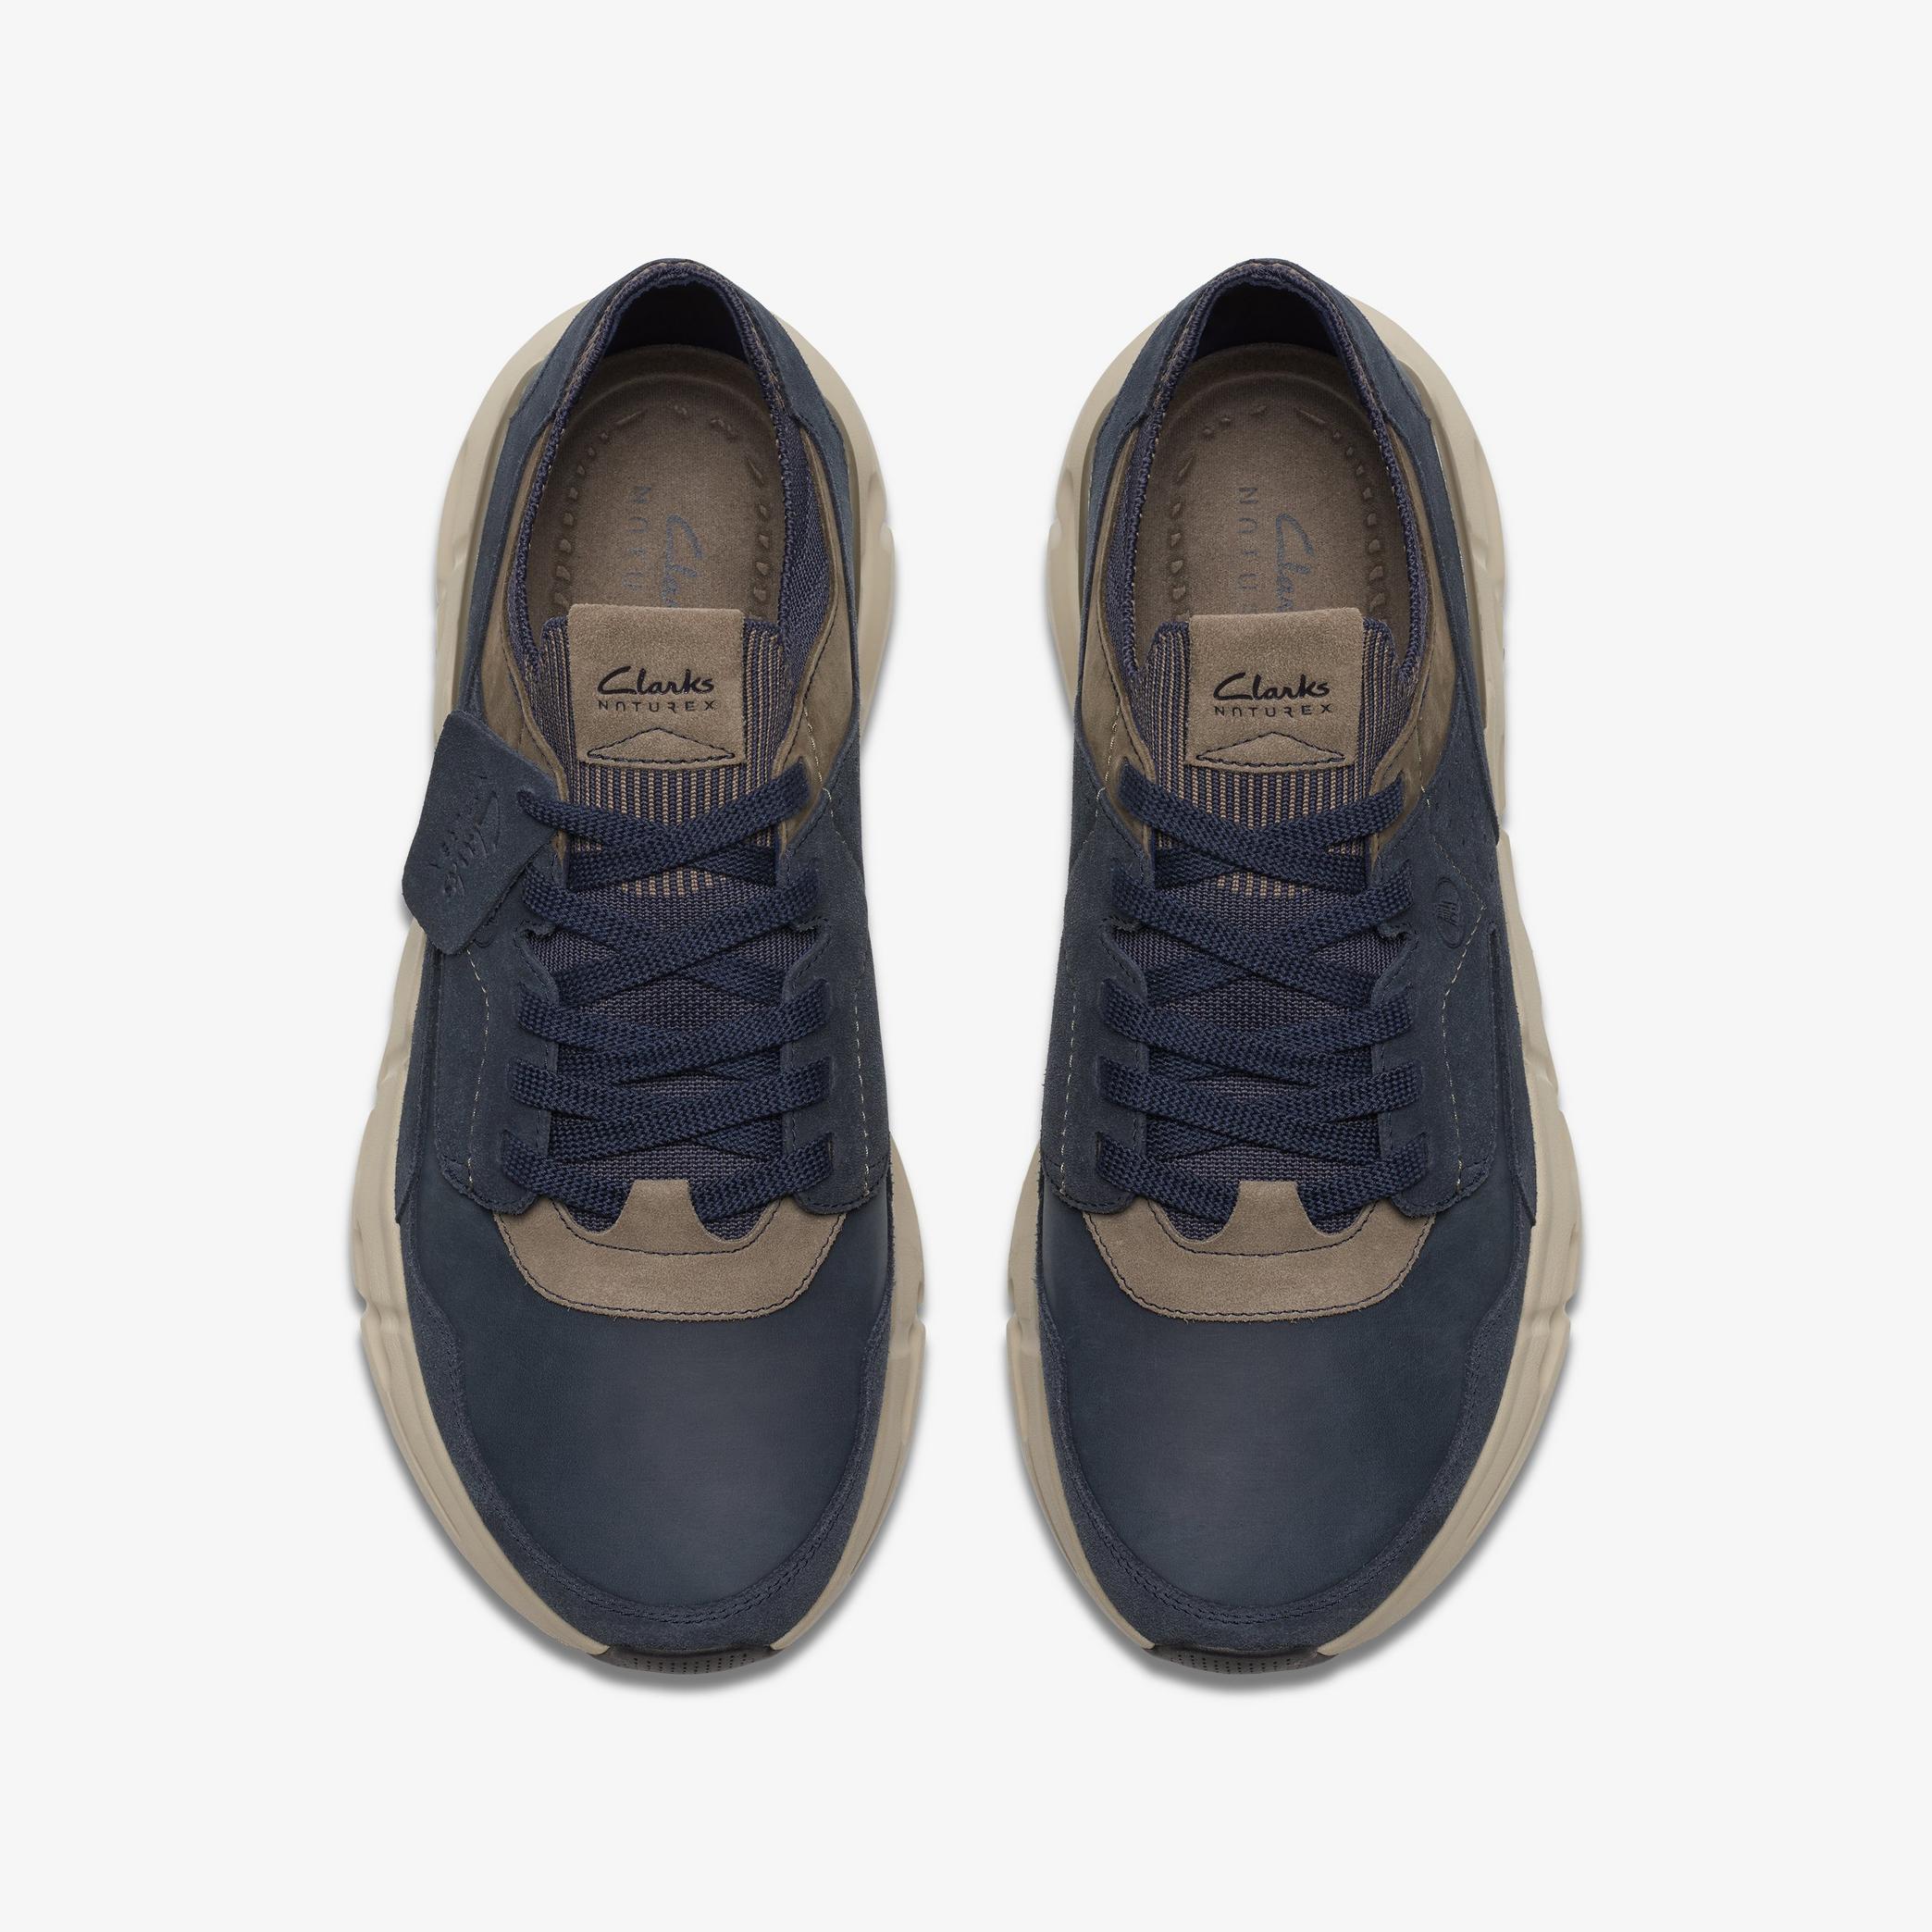 NXE Lo Navy Nubuck Shoes, view 6 of 7